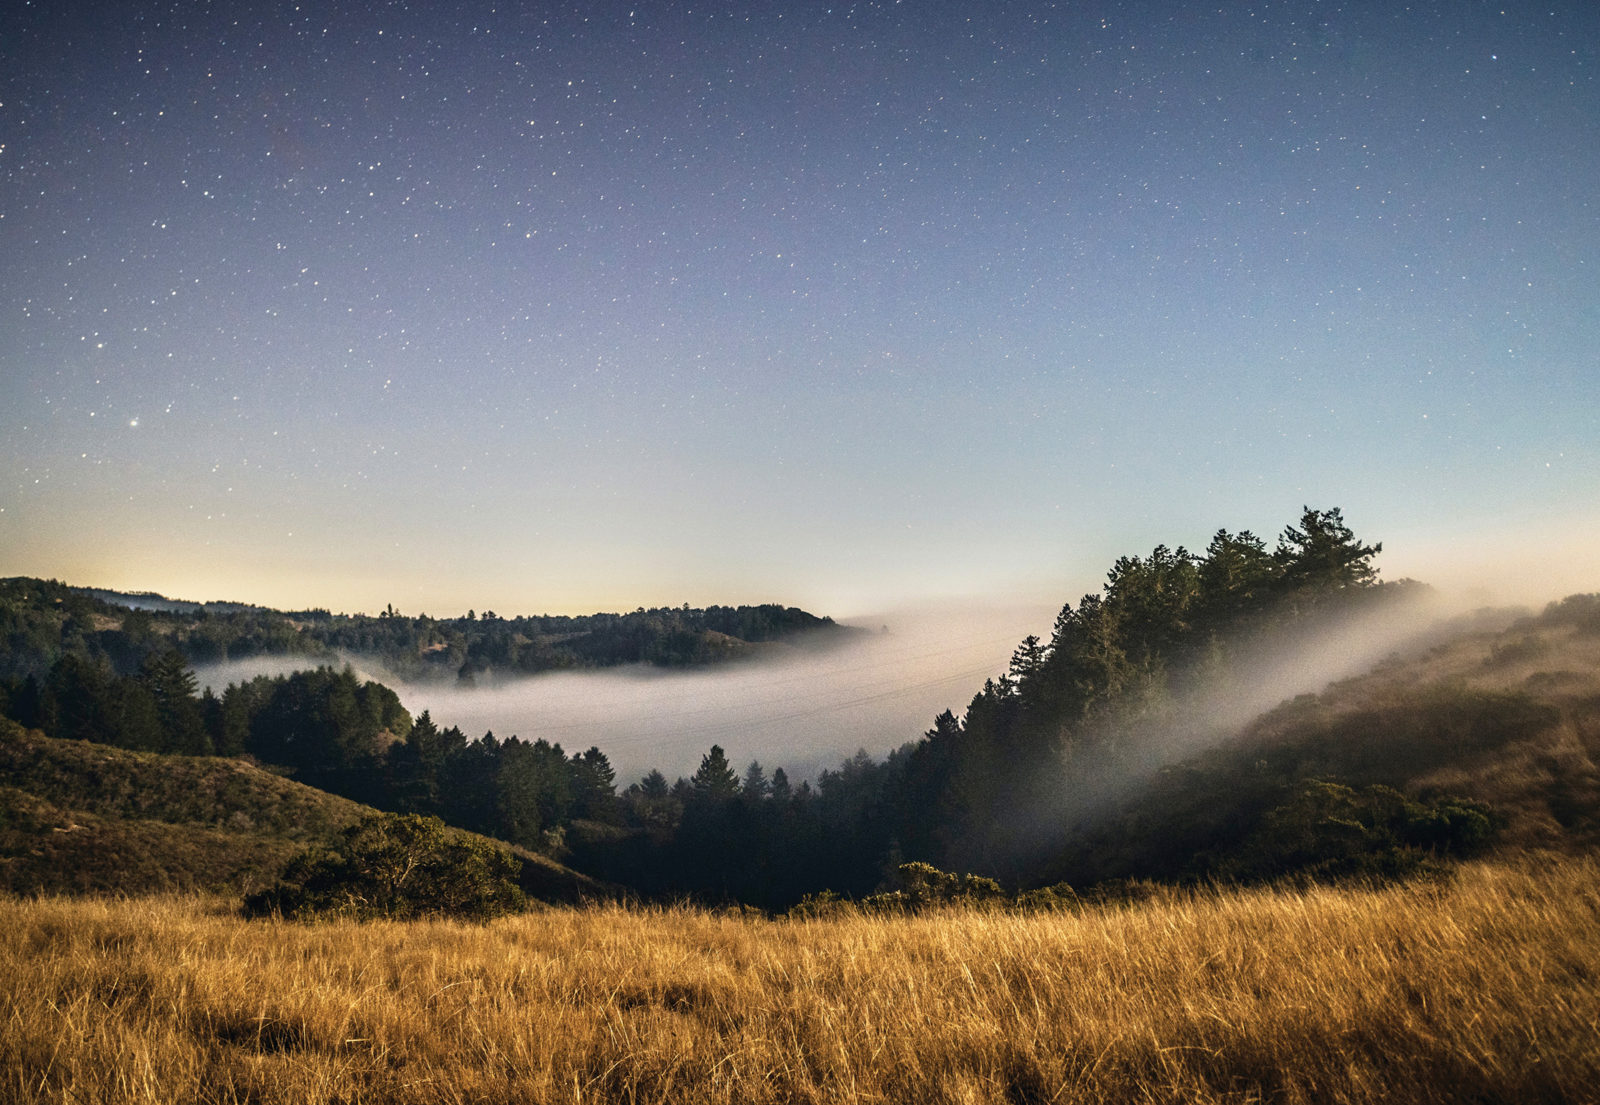 Night fog blankets the San Vicente Redwoods on an otherwise clear night. (Teddy Miller)